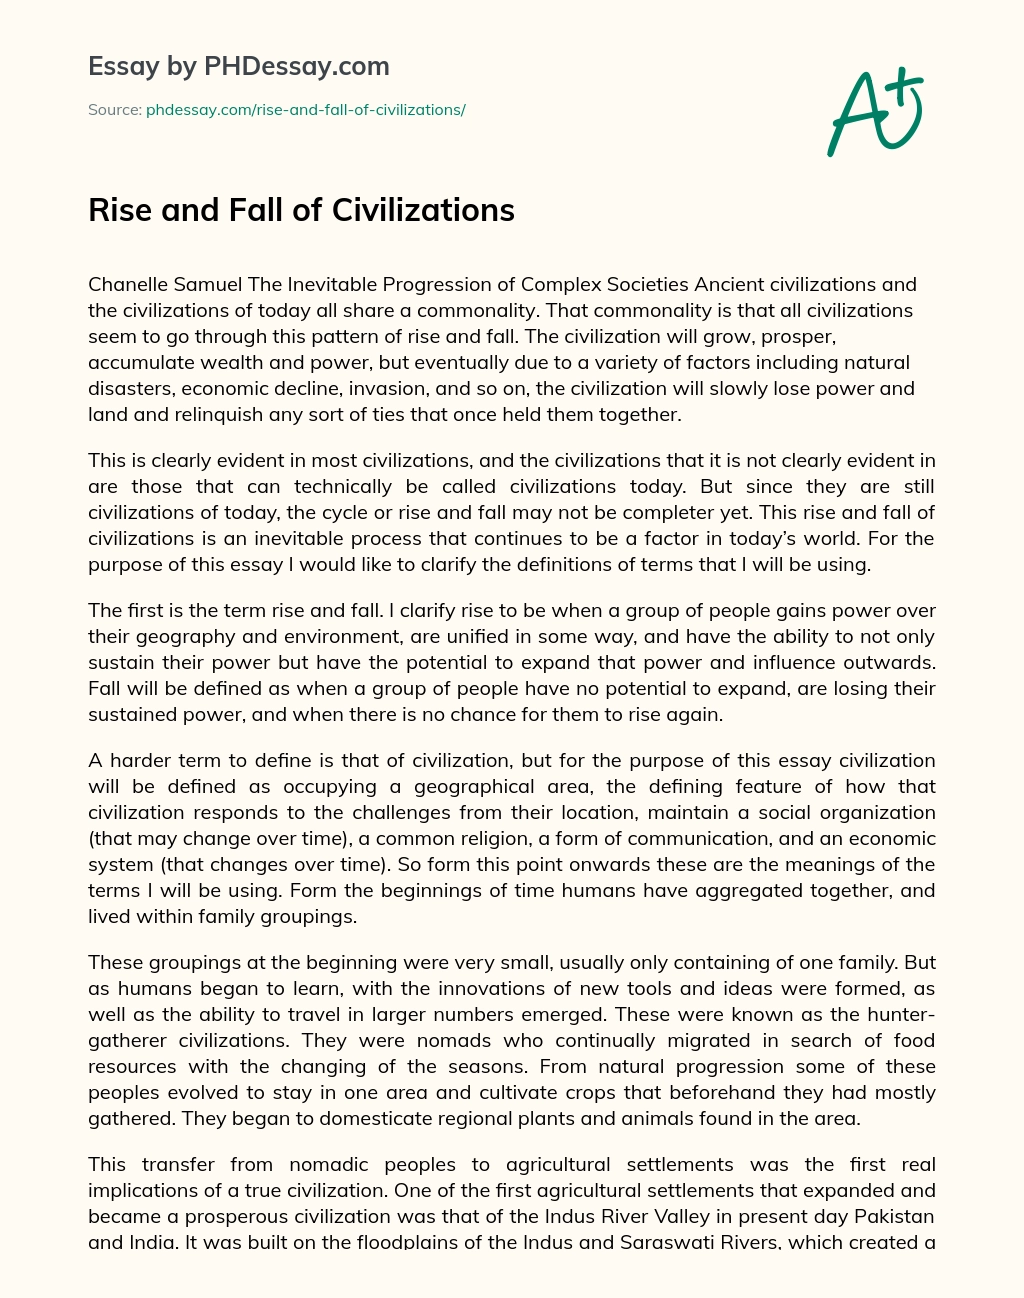 Rise and Fall of Civilizations essay